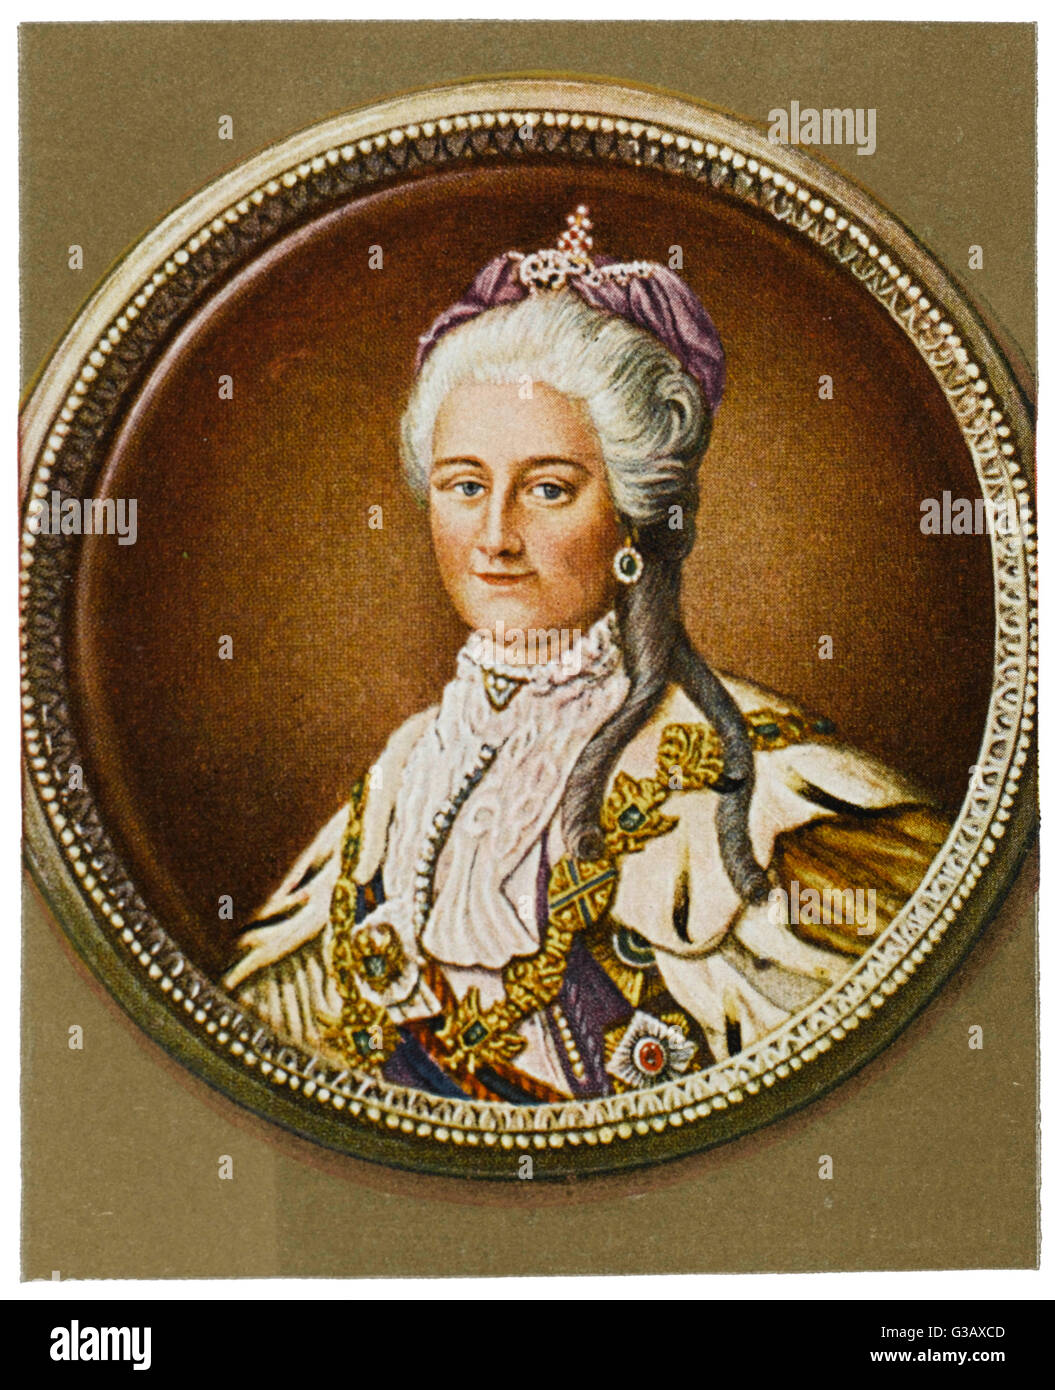 CATHERINE THE GREAT  Empress of Russia  (1762-96)       Date: 1729 - 1796 Stock Photo